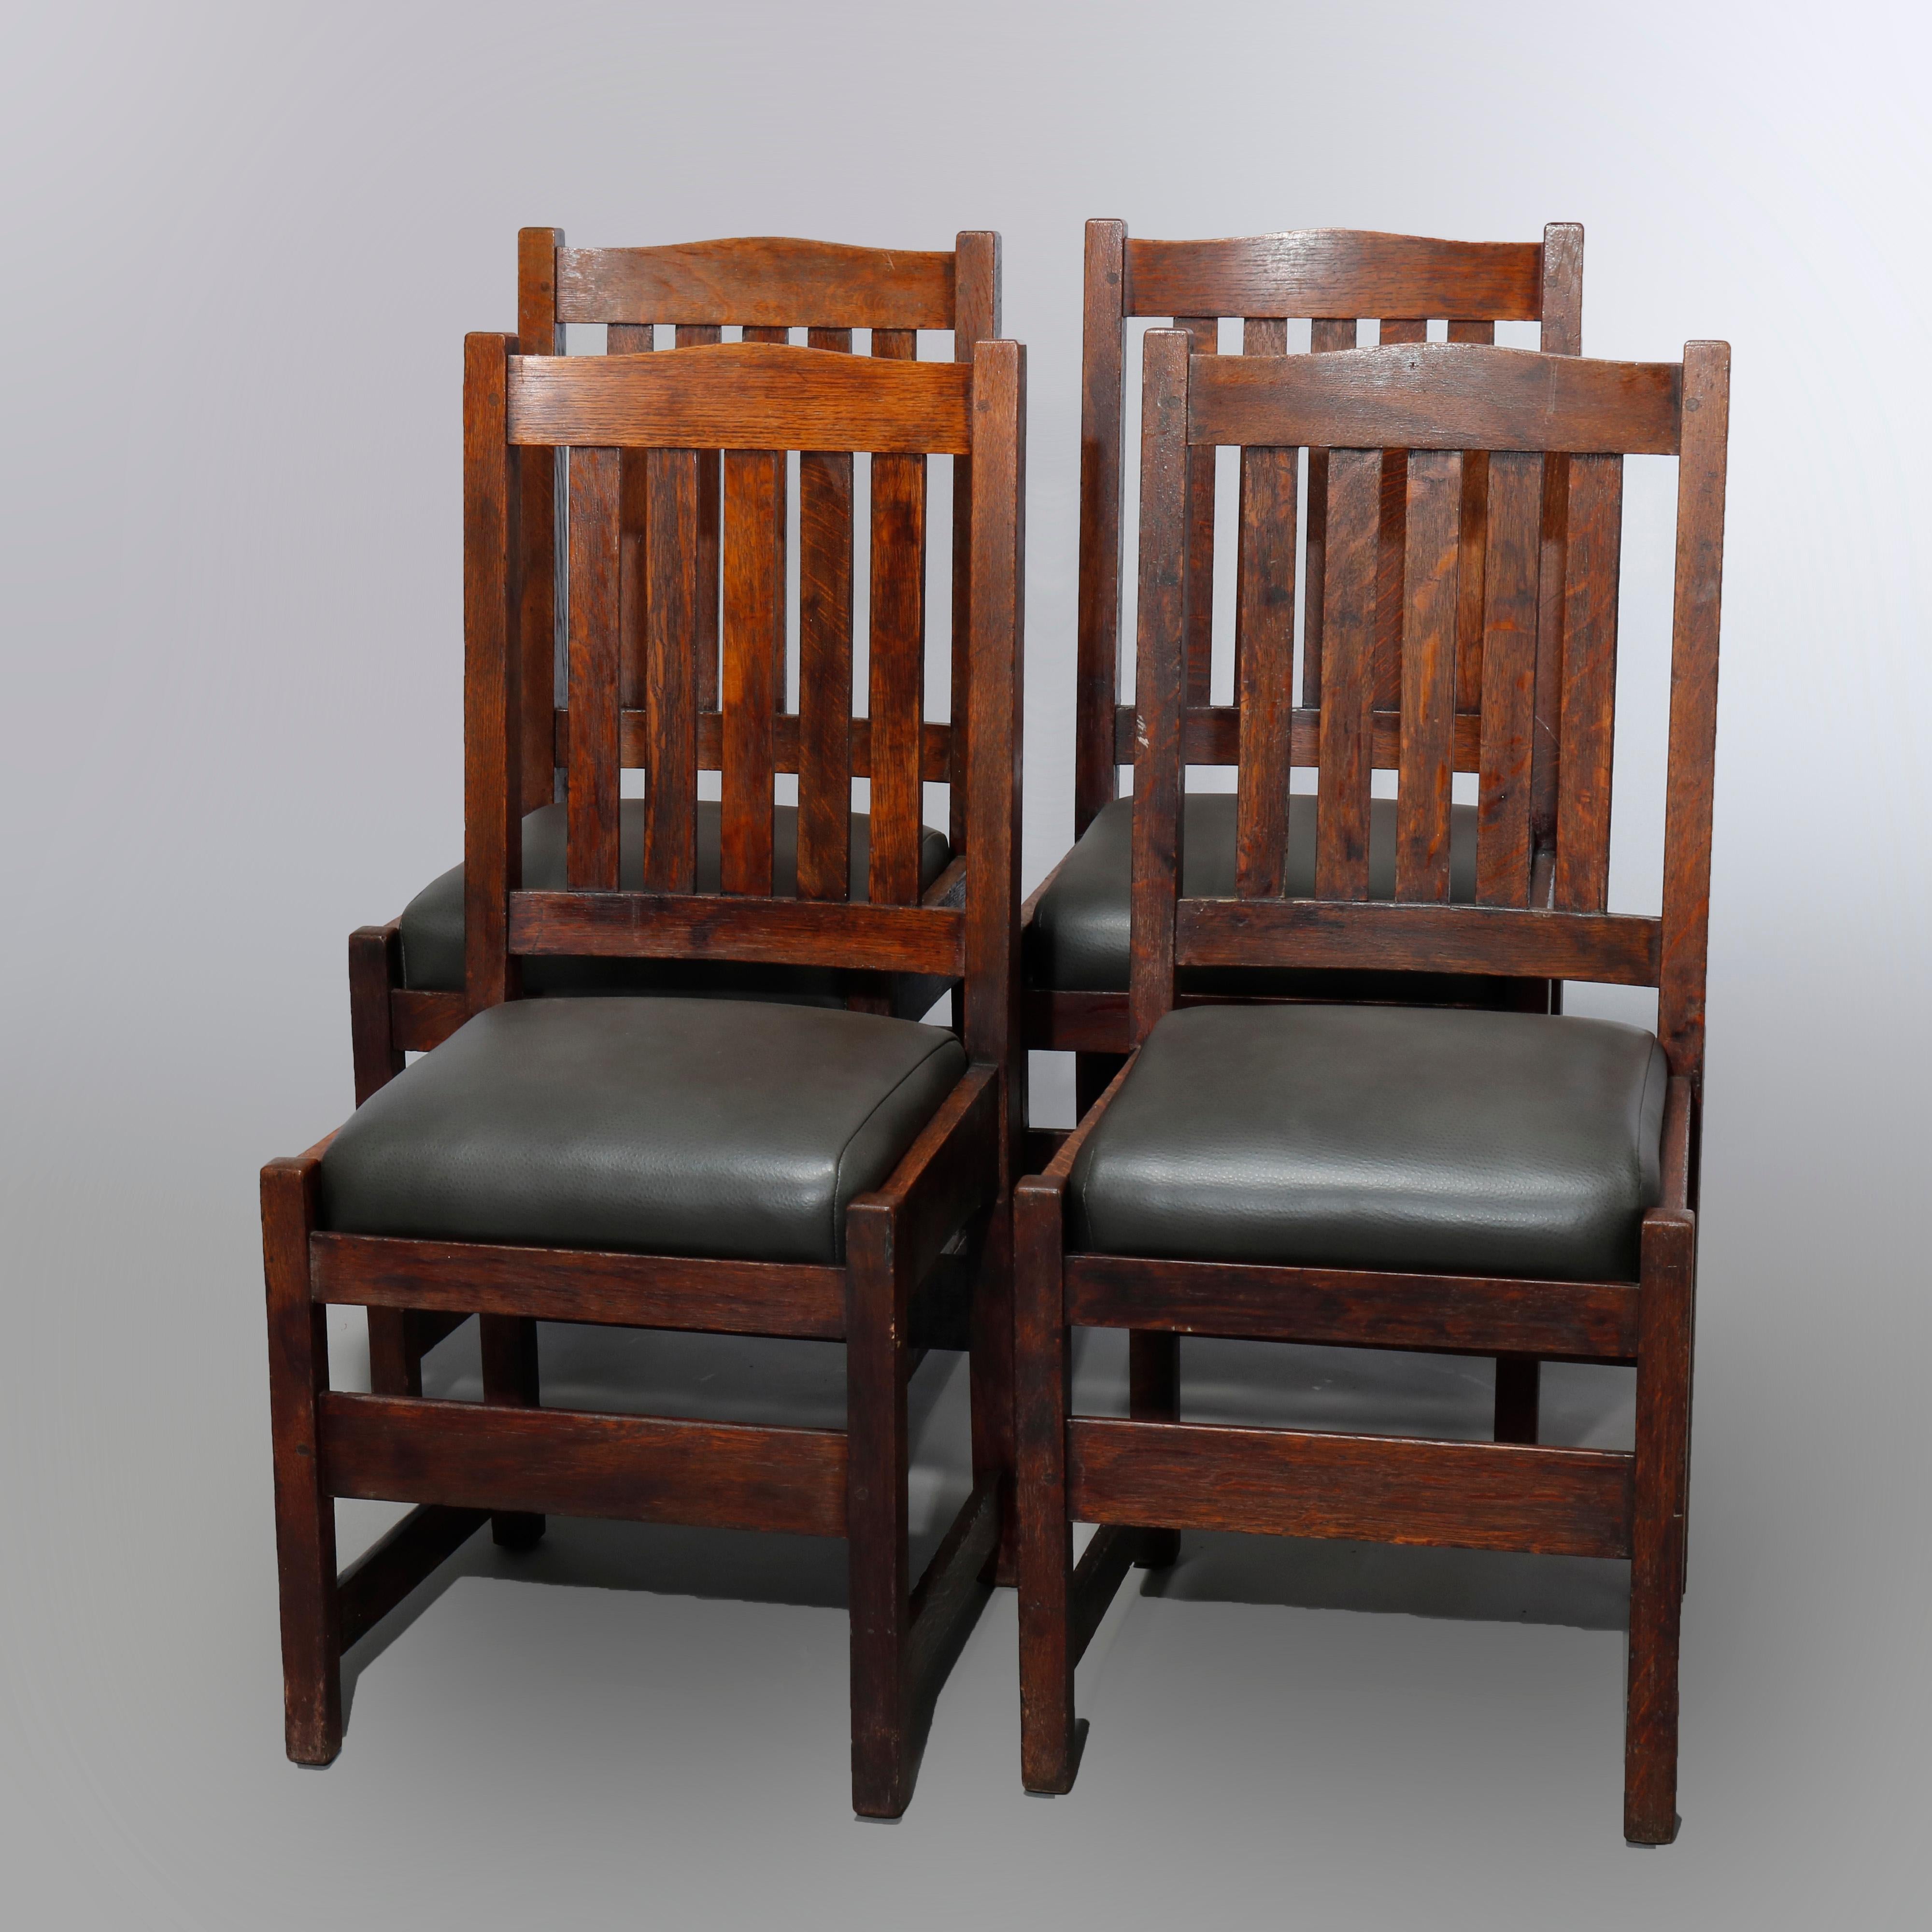 Four Arts & Crafts L&JG Stickley Mission Oak & Leather Dining Chairs, c1910 1